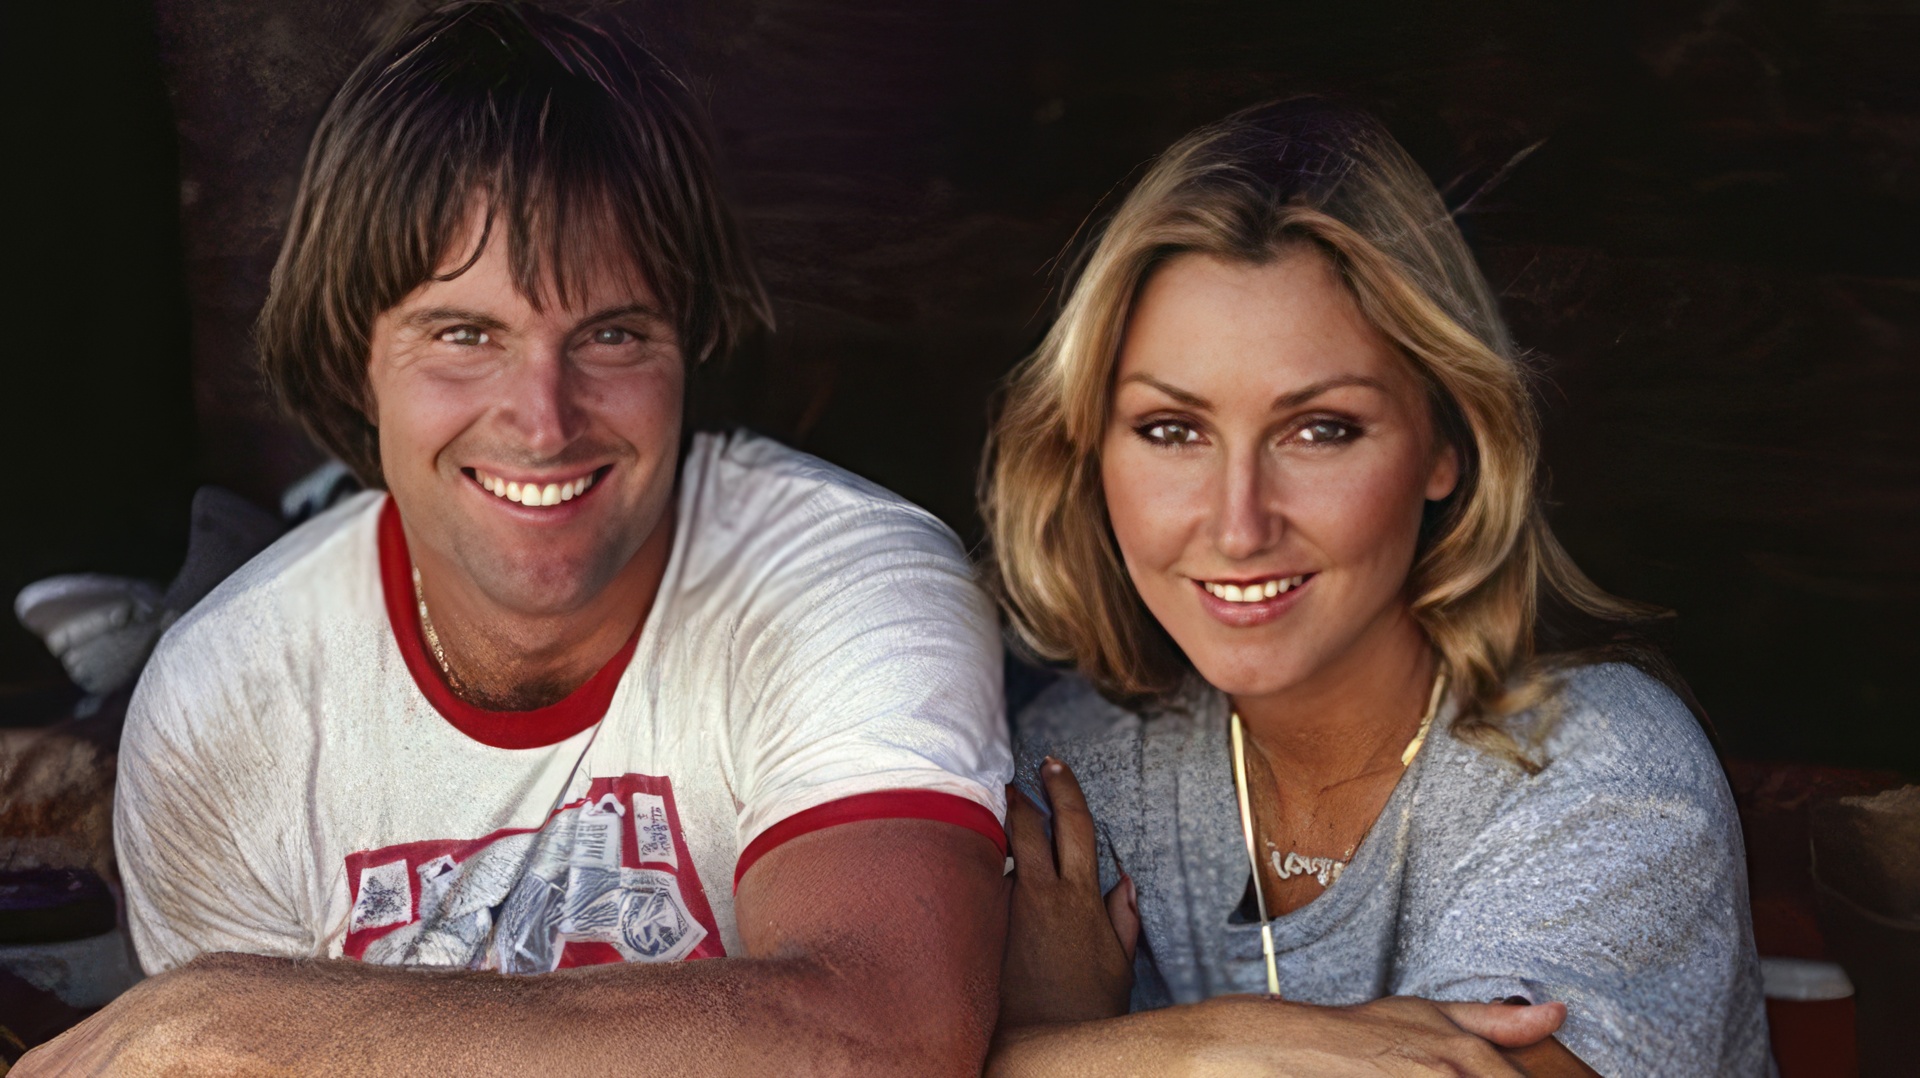 Bruce Jenner and his wife Linda Thompson